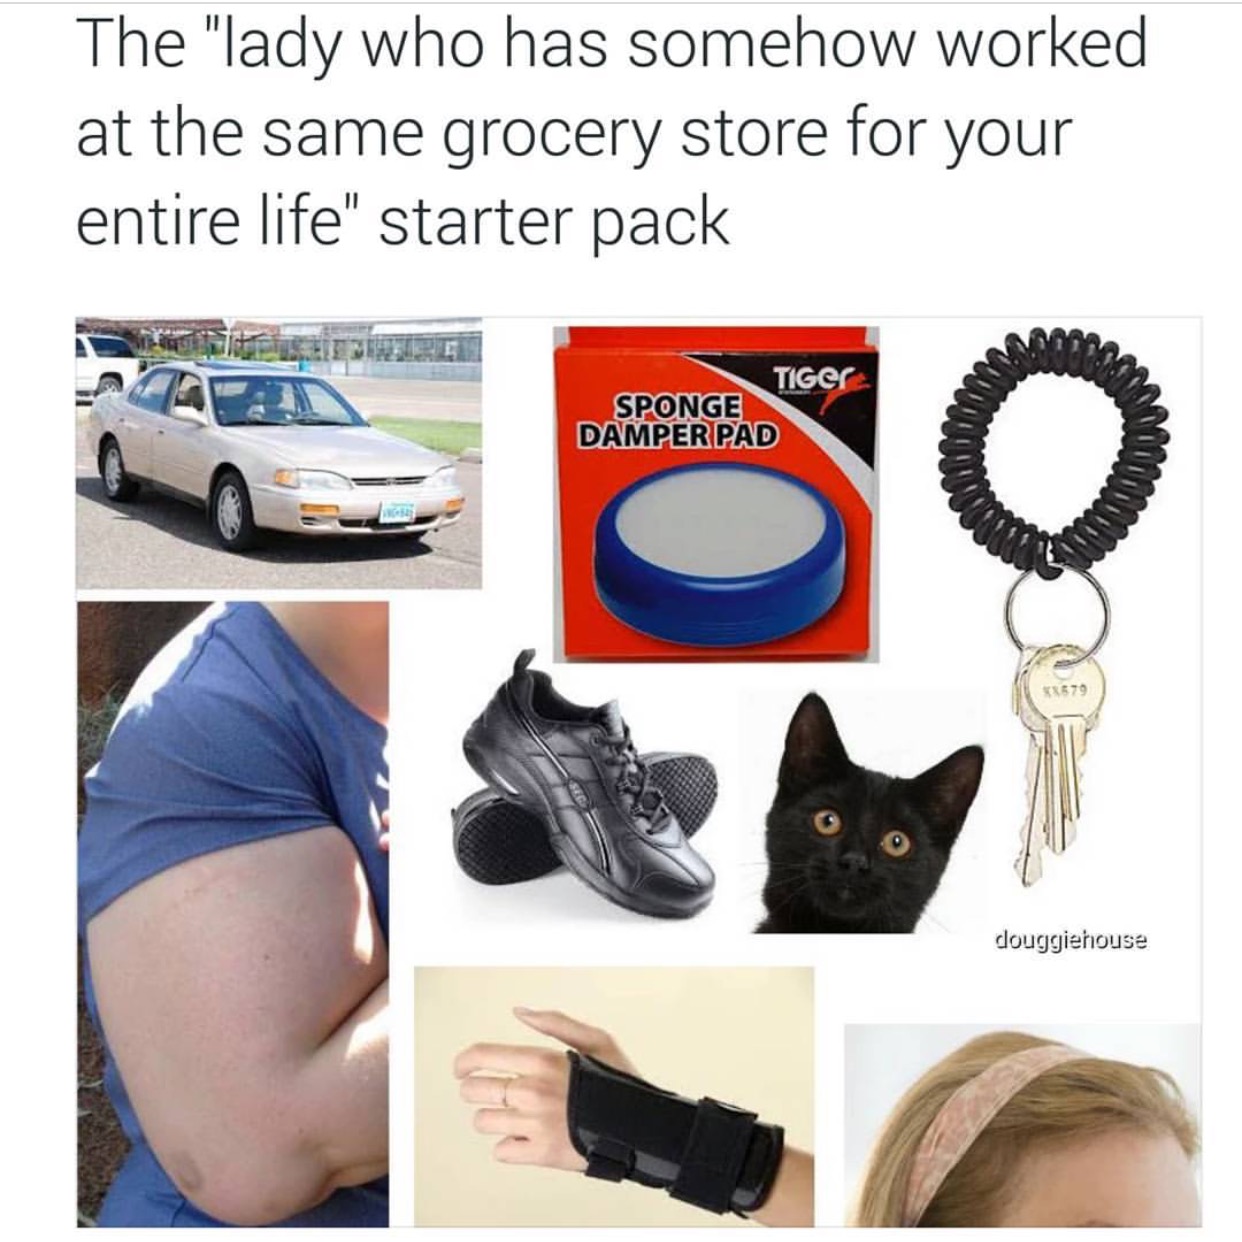 starter pack meme - The "lady who has somehow worked at the same grocery store for your entire life" starter pack Tig Sponge Damperpad S3679 douggiehouse